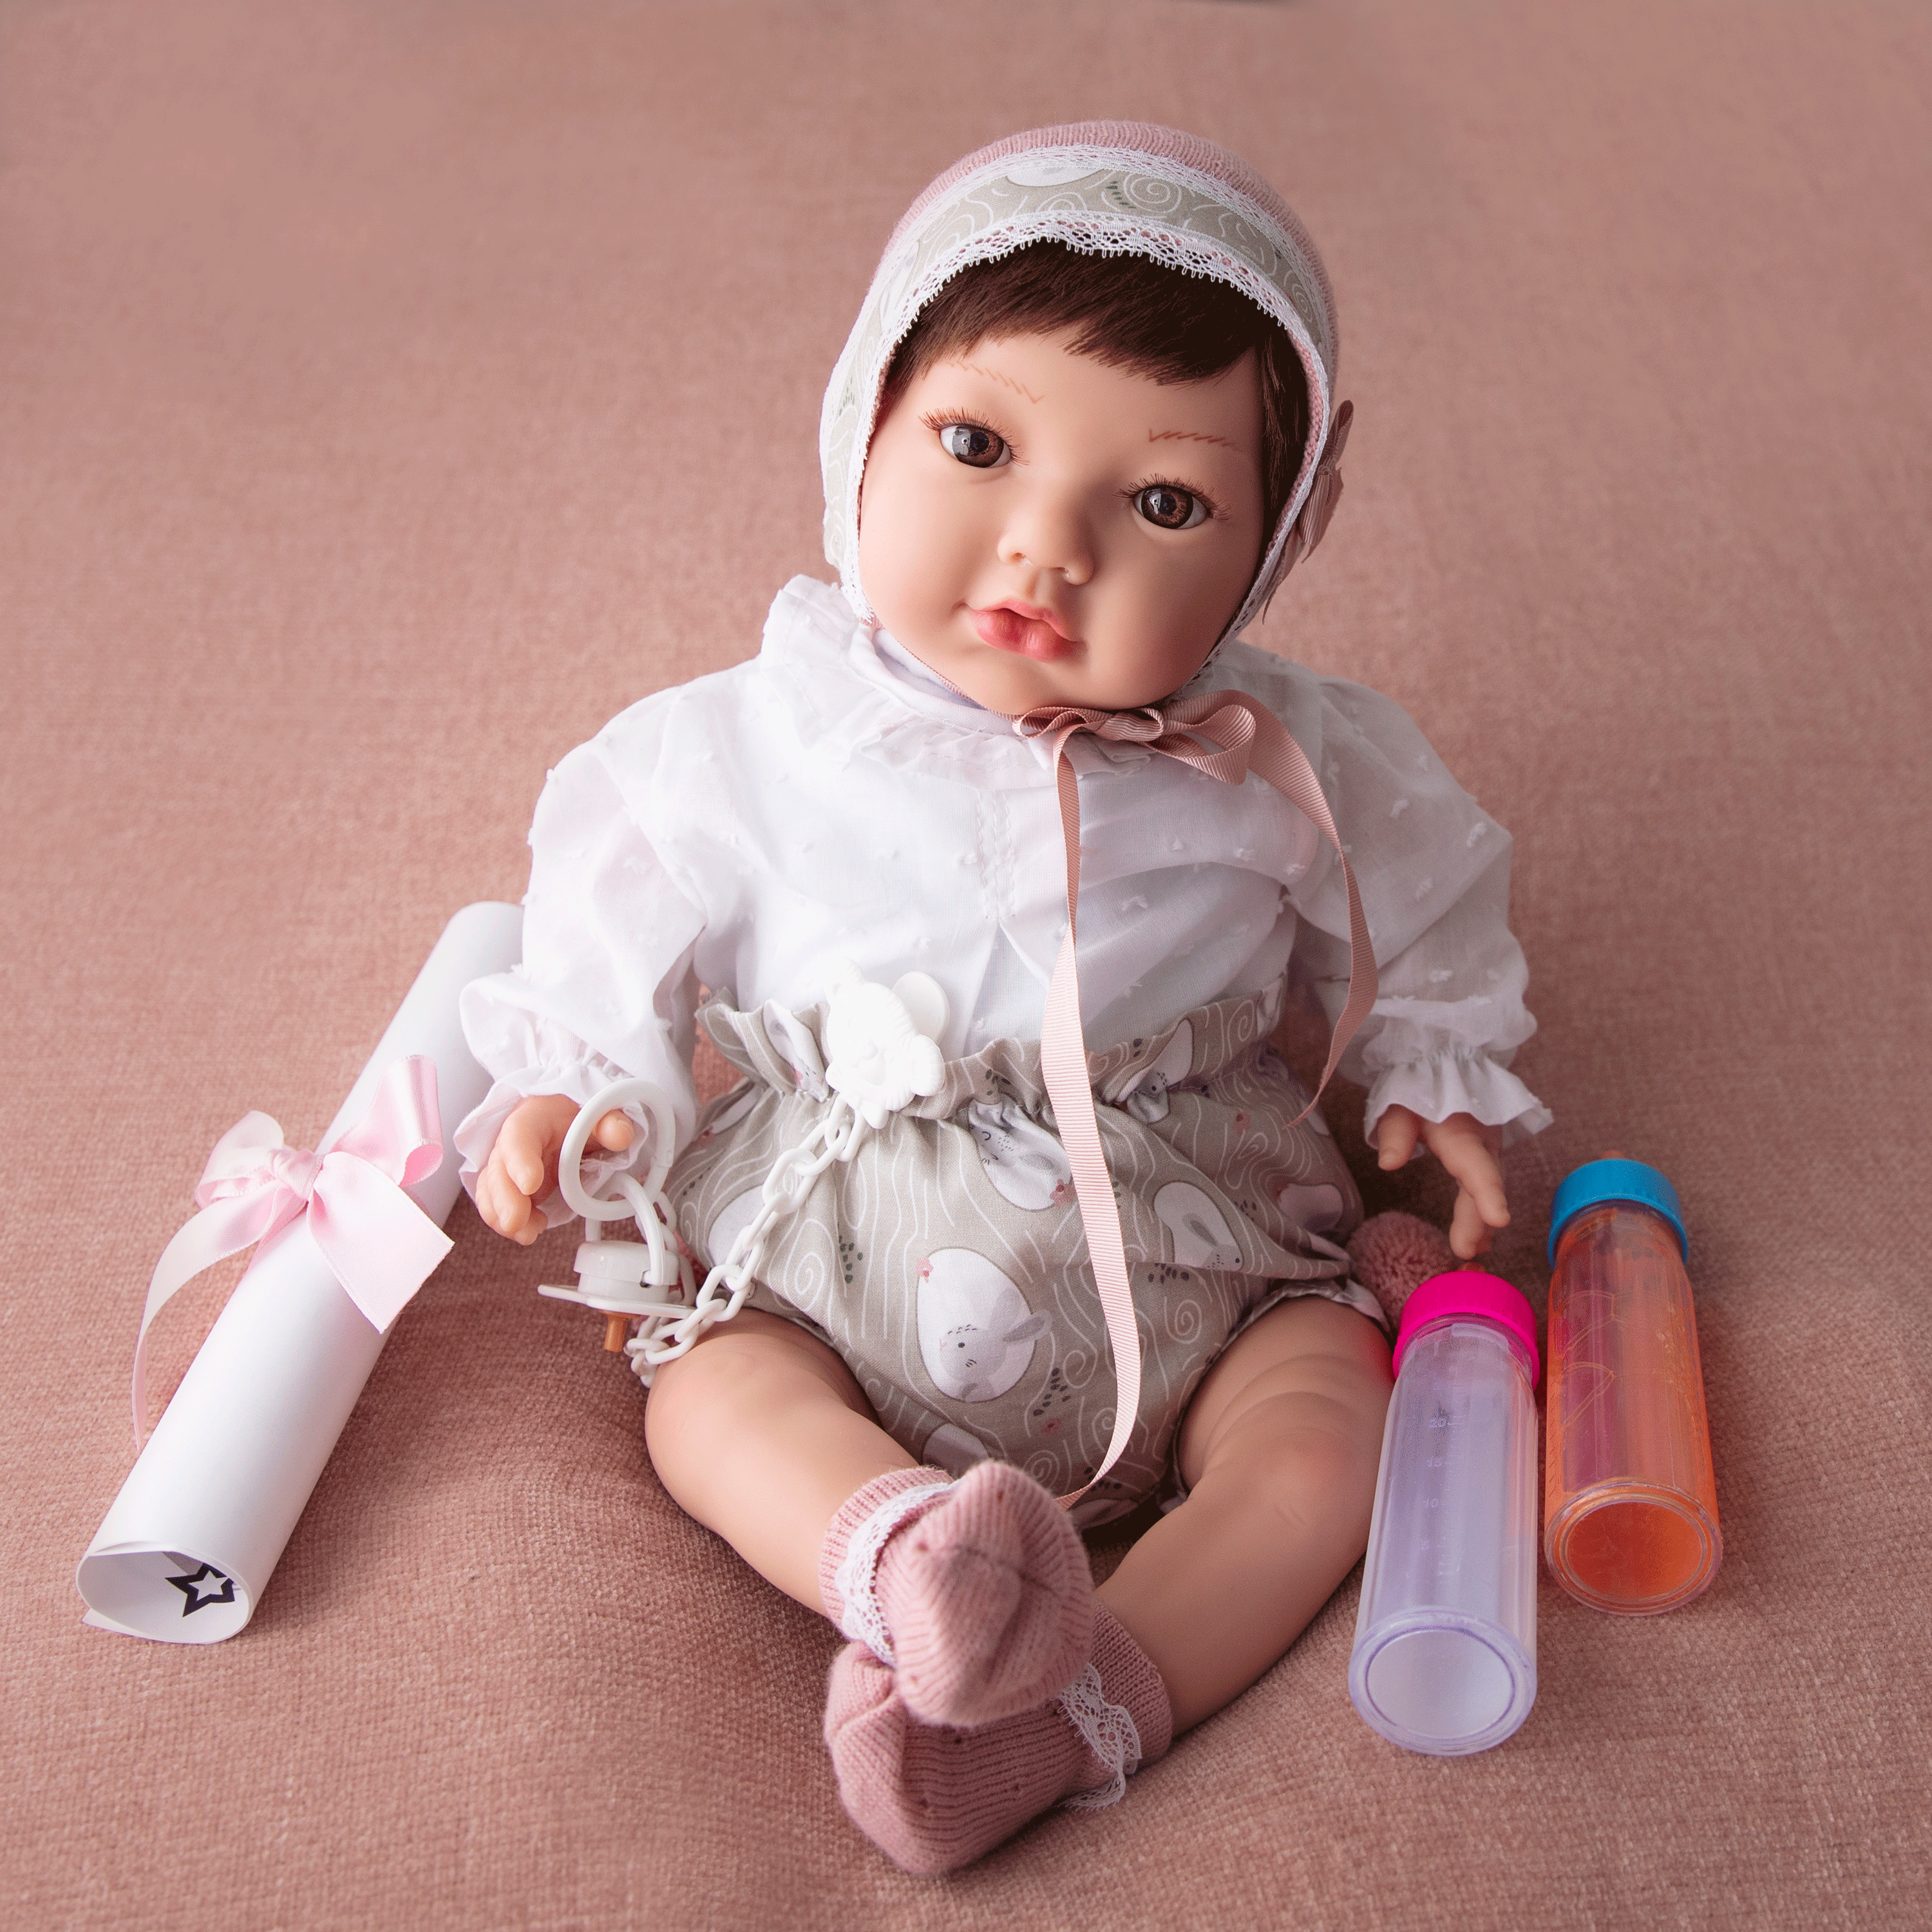 Reborn Baby Doll Reborn Matilda - 48CM and 2KG - SILICONE VINYL and HEAD DROPPING EFFECT 